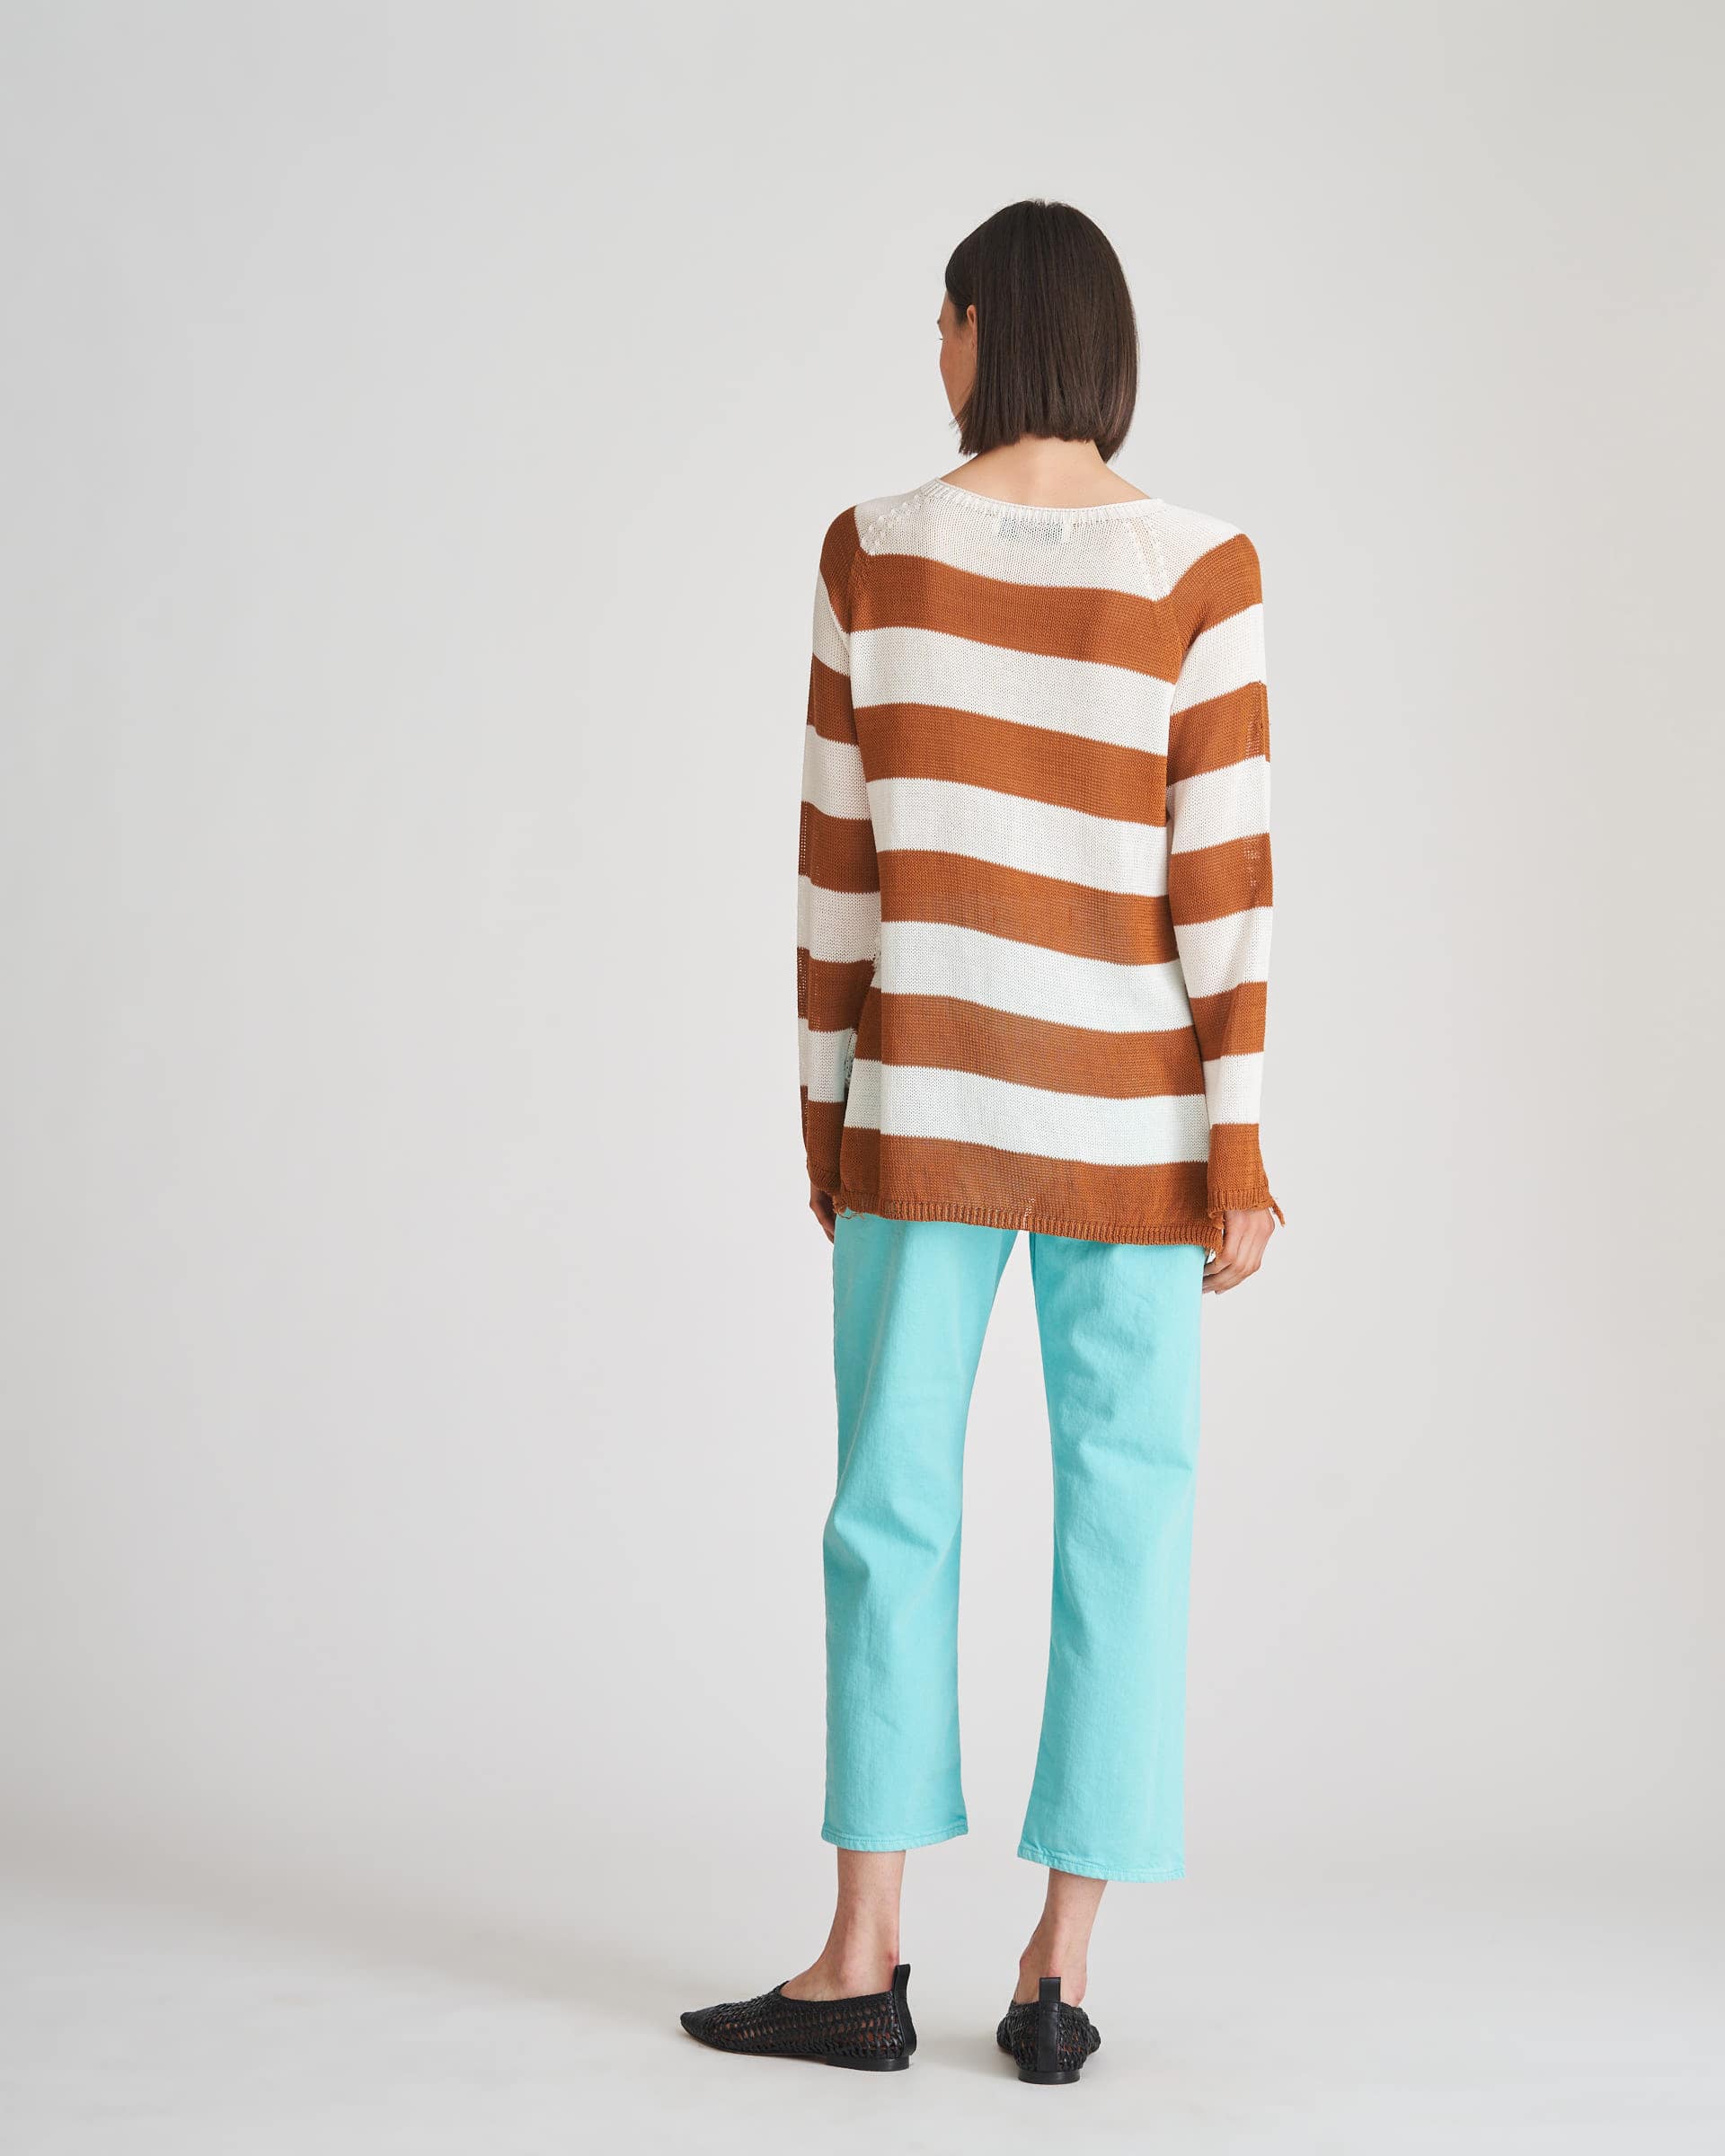 The Market Store | Franged Striped Boat